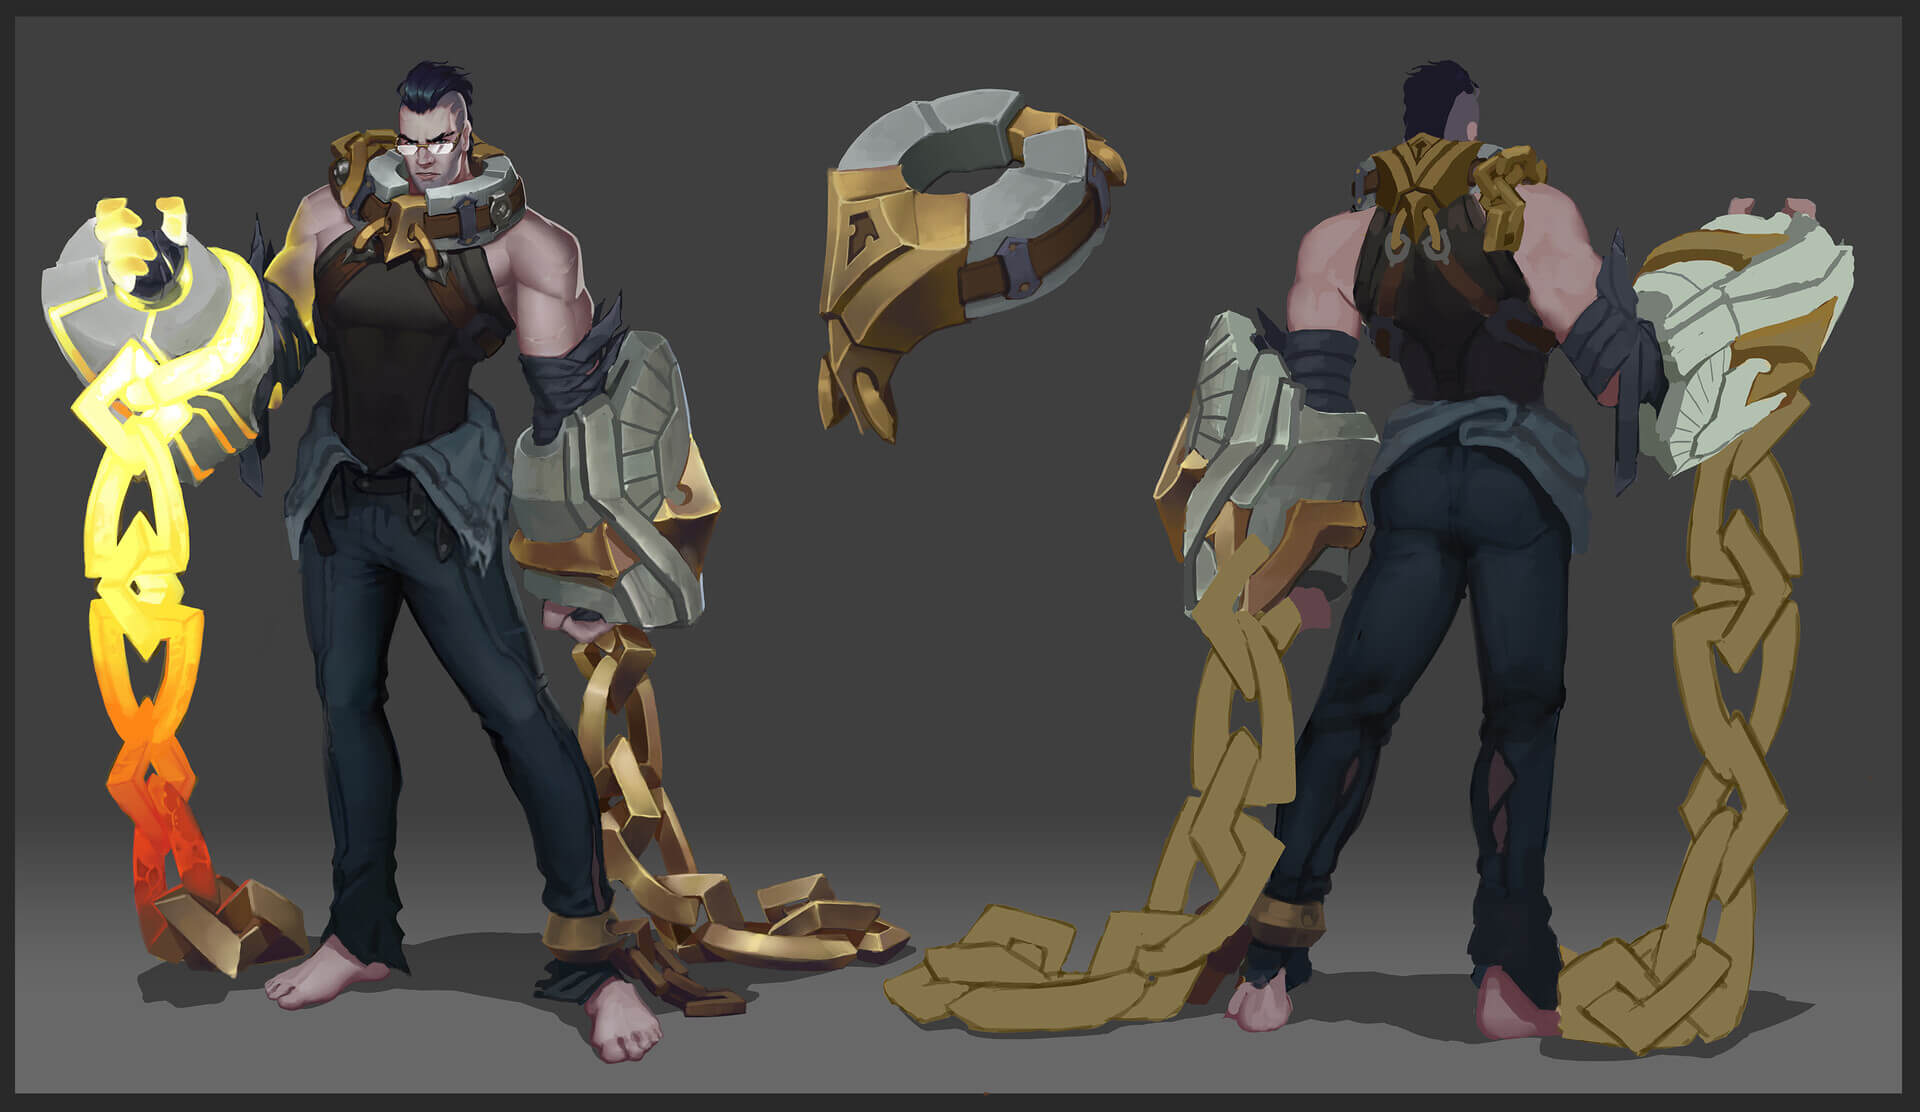 Sylas front and back posing with chains and manacles. One chain is glowing from incandescence